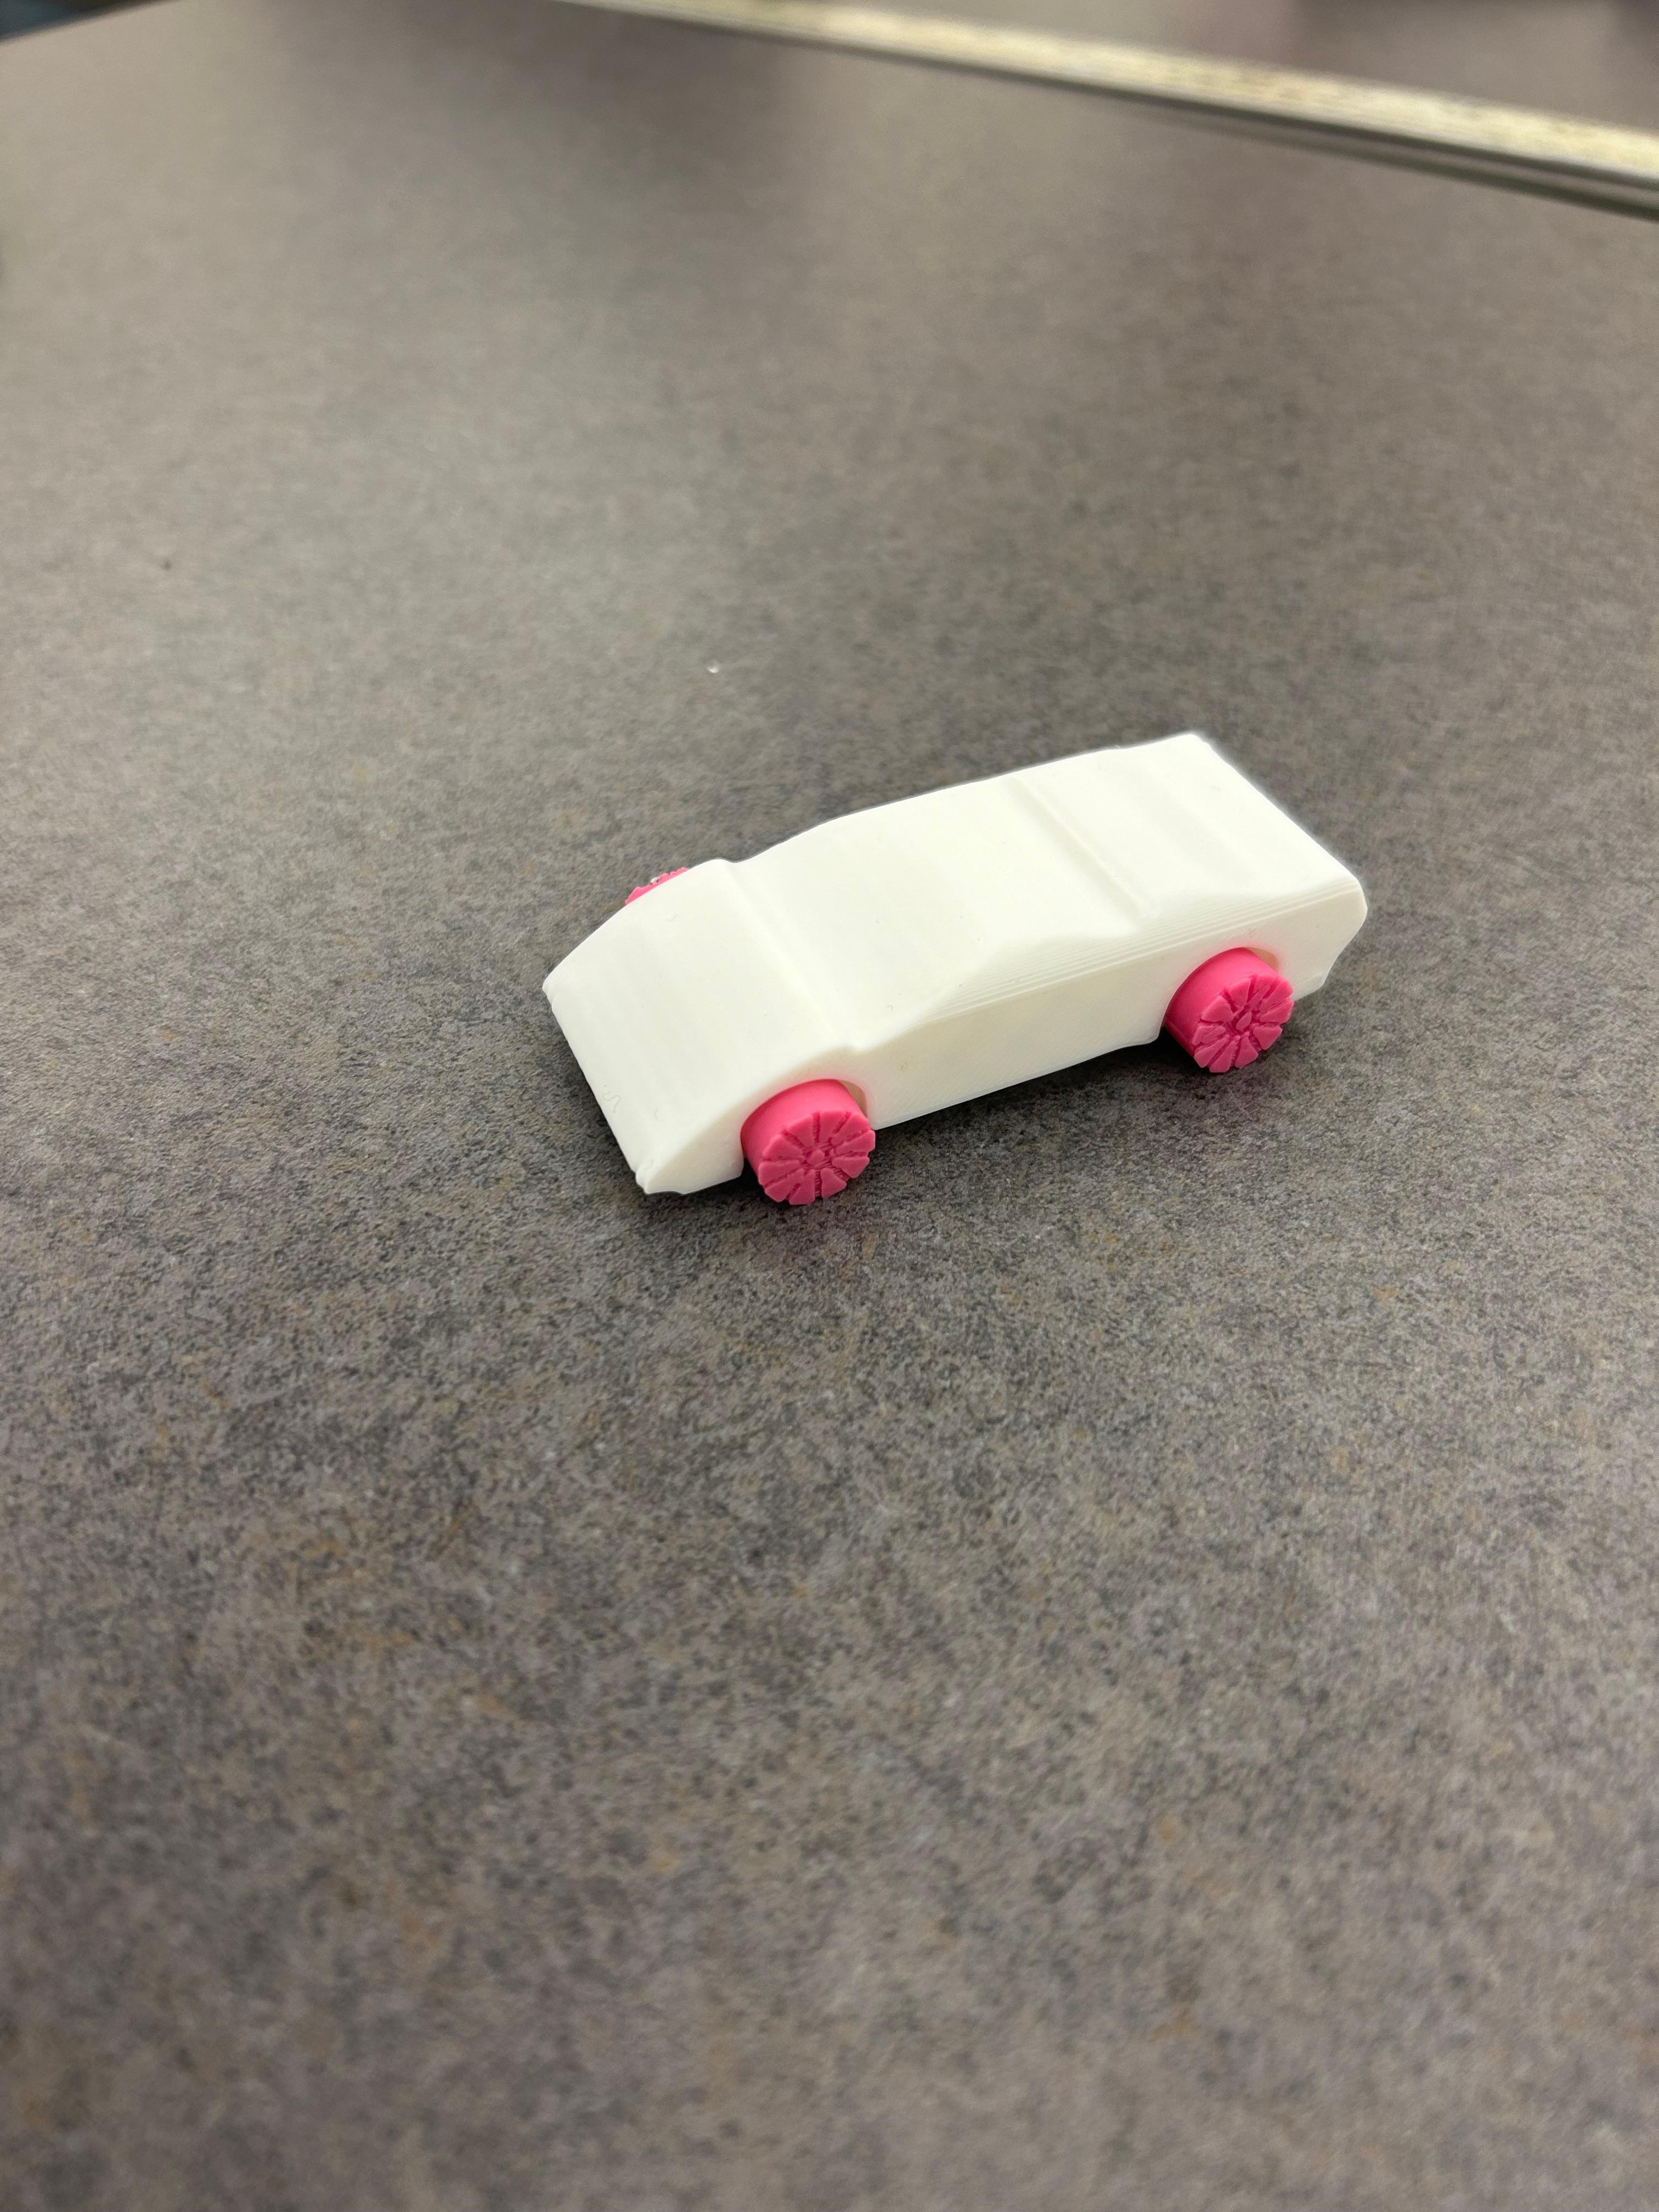 Toy Car Coming Soon